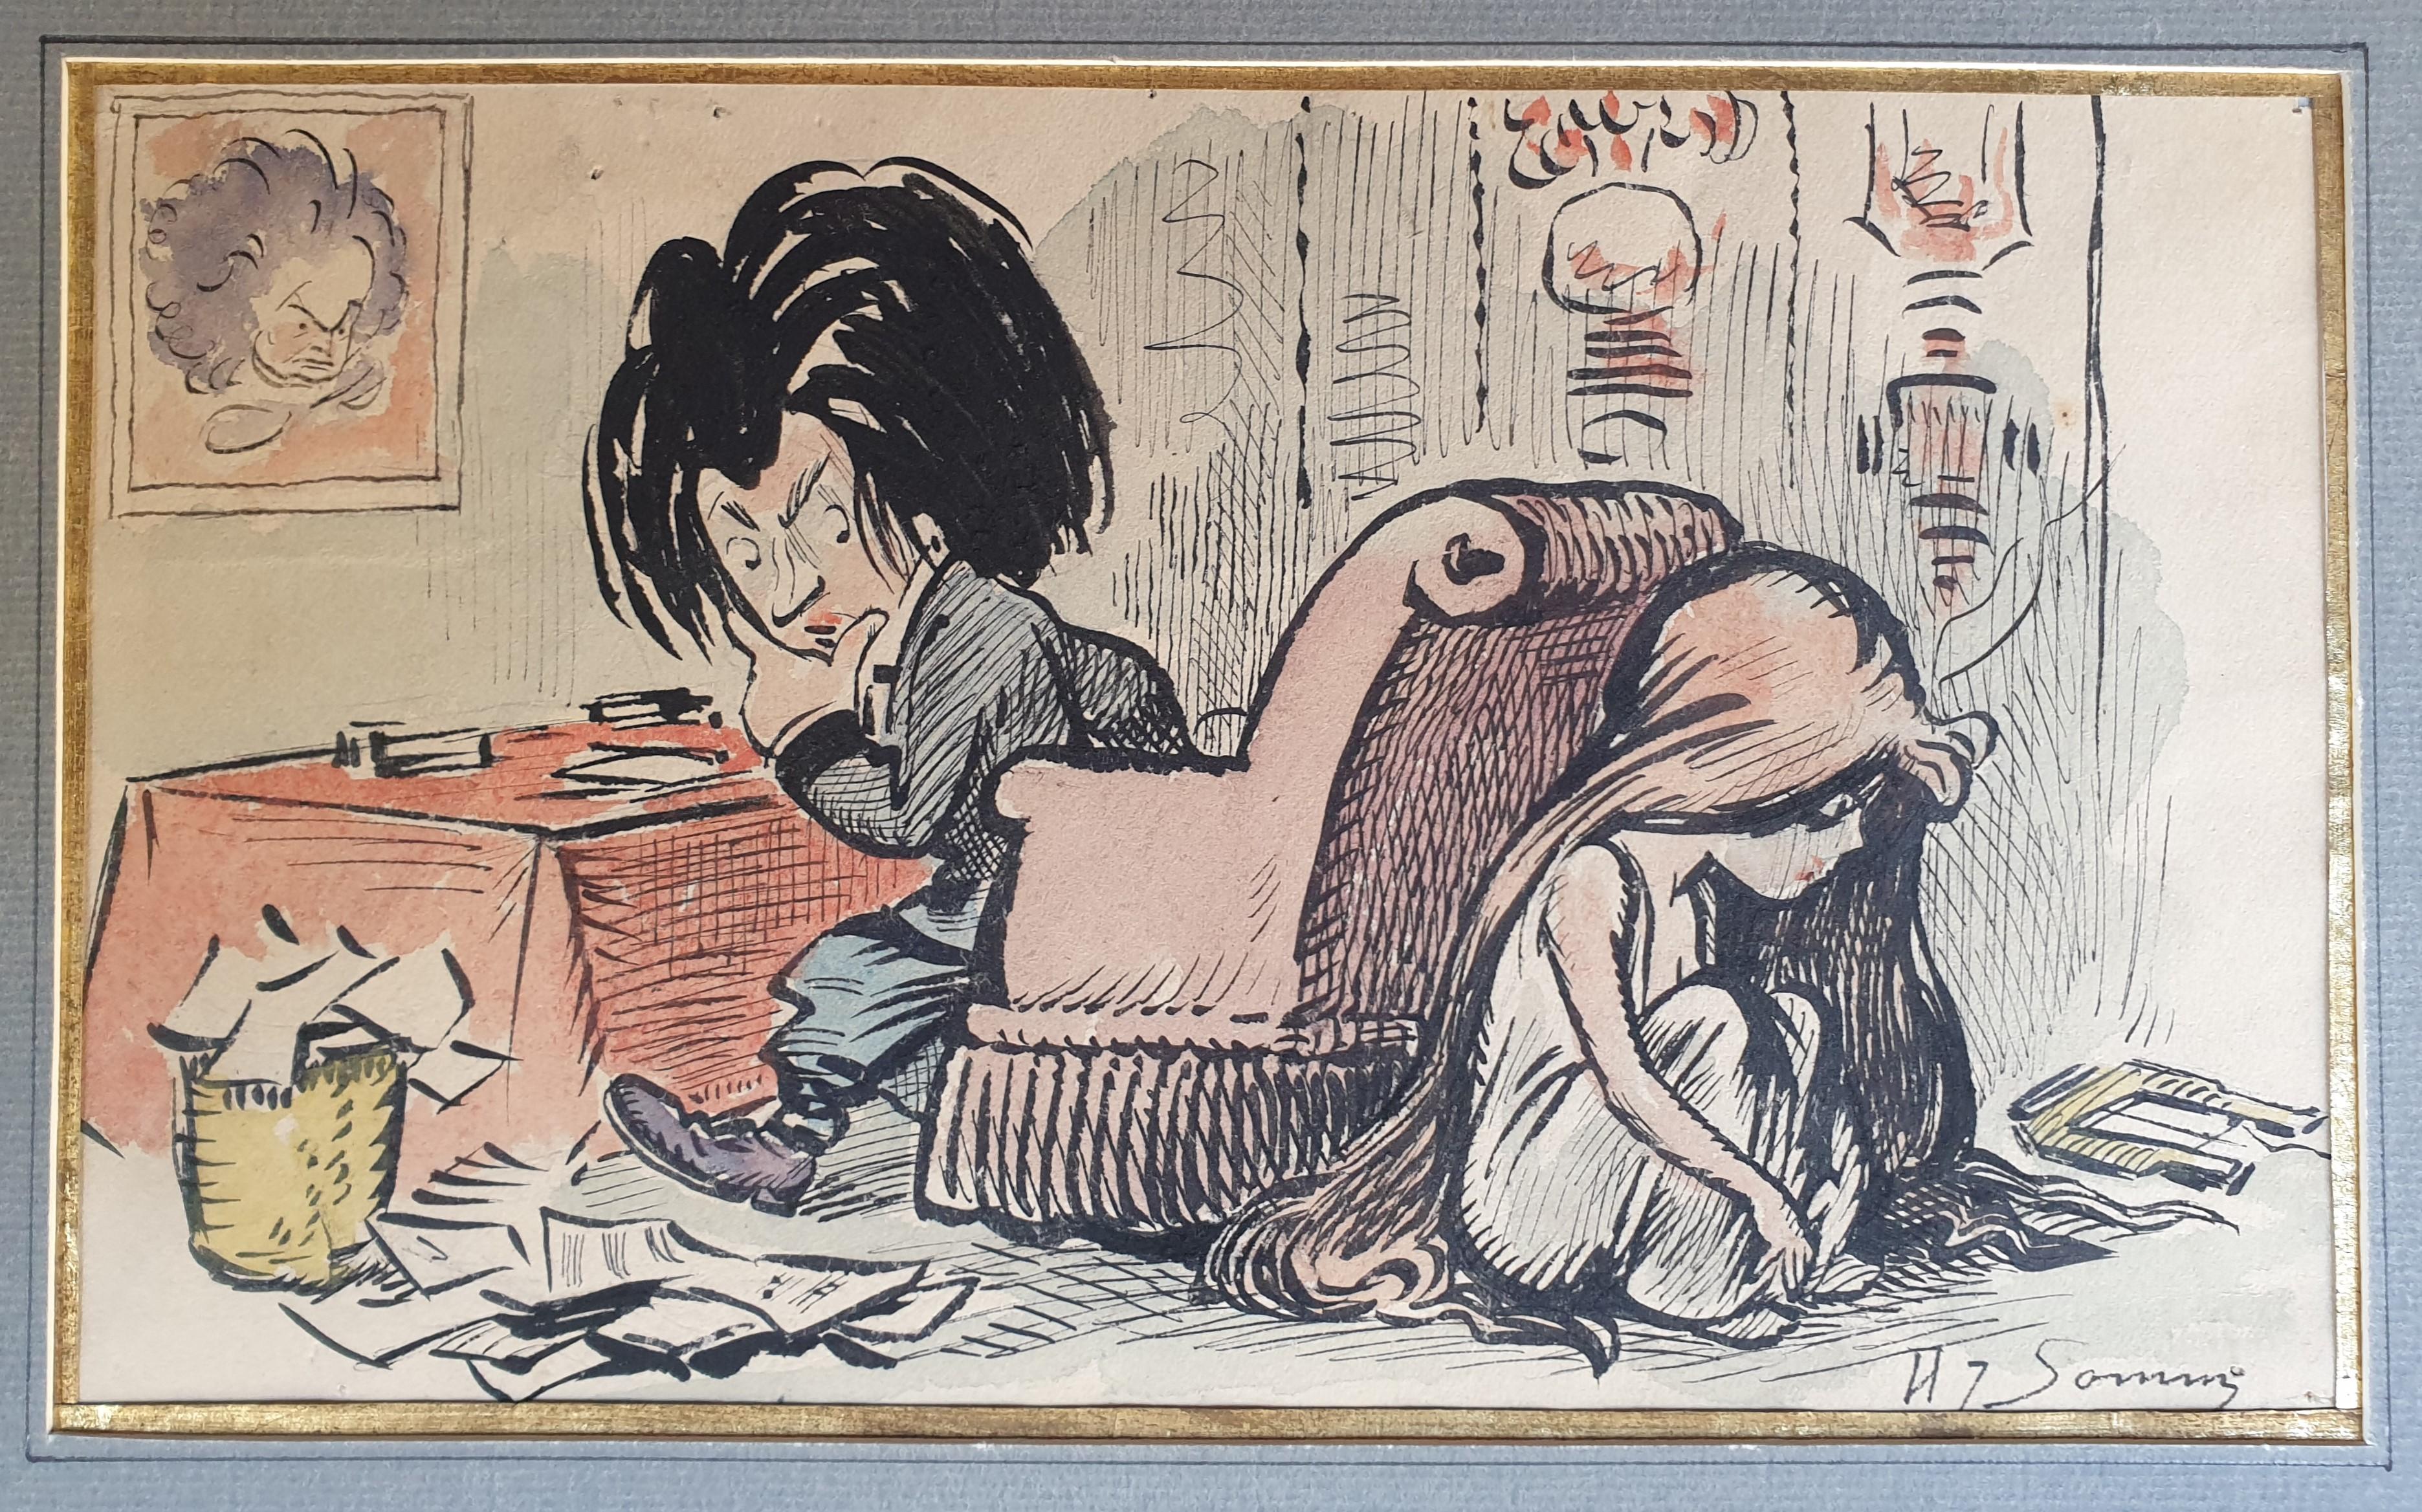 Henri SOMM
Rouen, 1844 - Paris, 1907
Pen and watercolor
14 x 23 cm (22 x 28 cm with the frame)
Signed lower right "H. Somm"

Caricature of Beethoven writing his famous letter to Elise!

Very good condition.